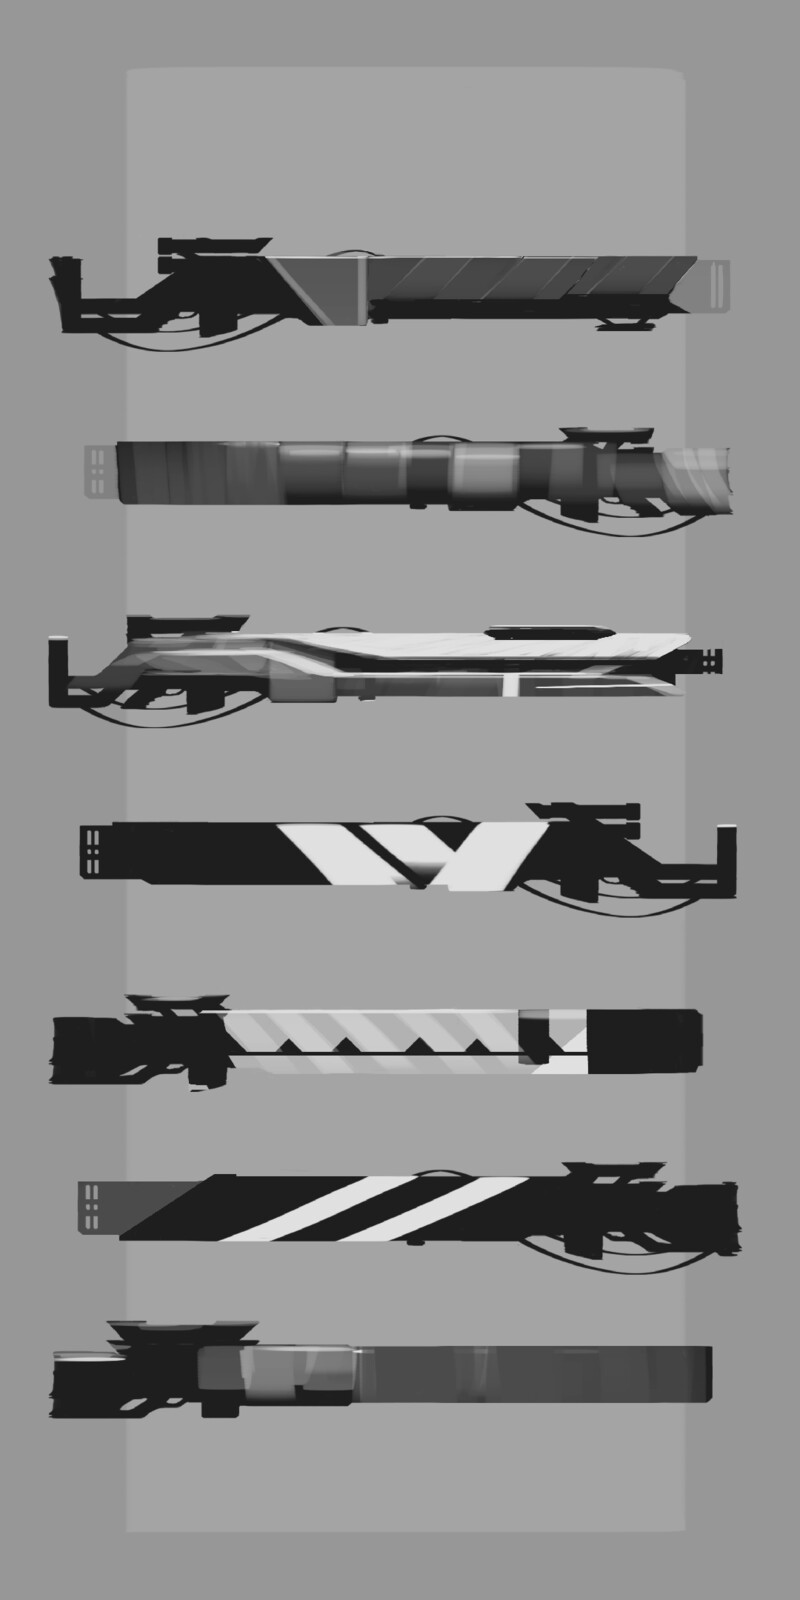 Few initial sketches for Kira's rifle.